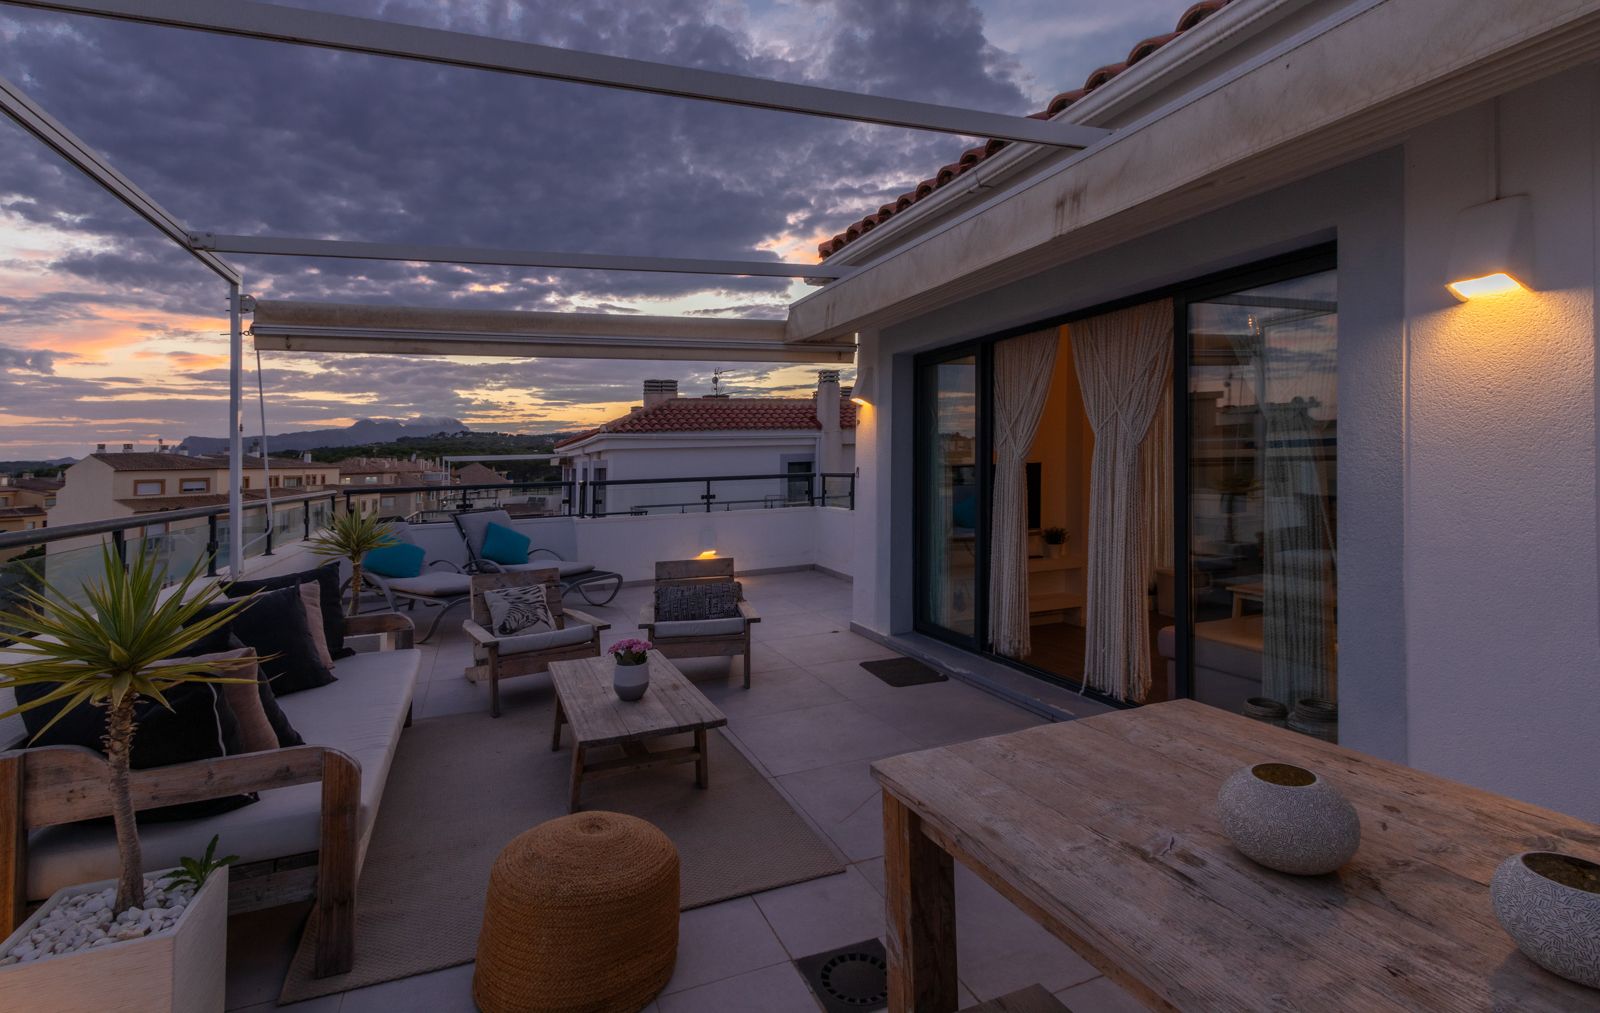 2 Bedroom Penthouse for Sale in the Centre of Moraira